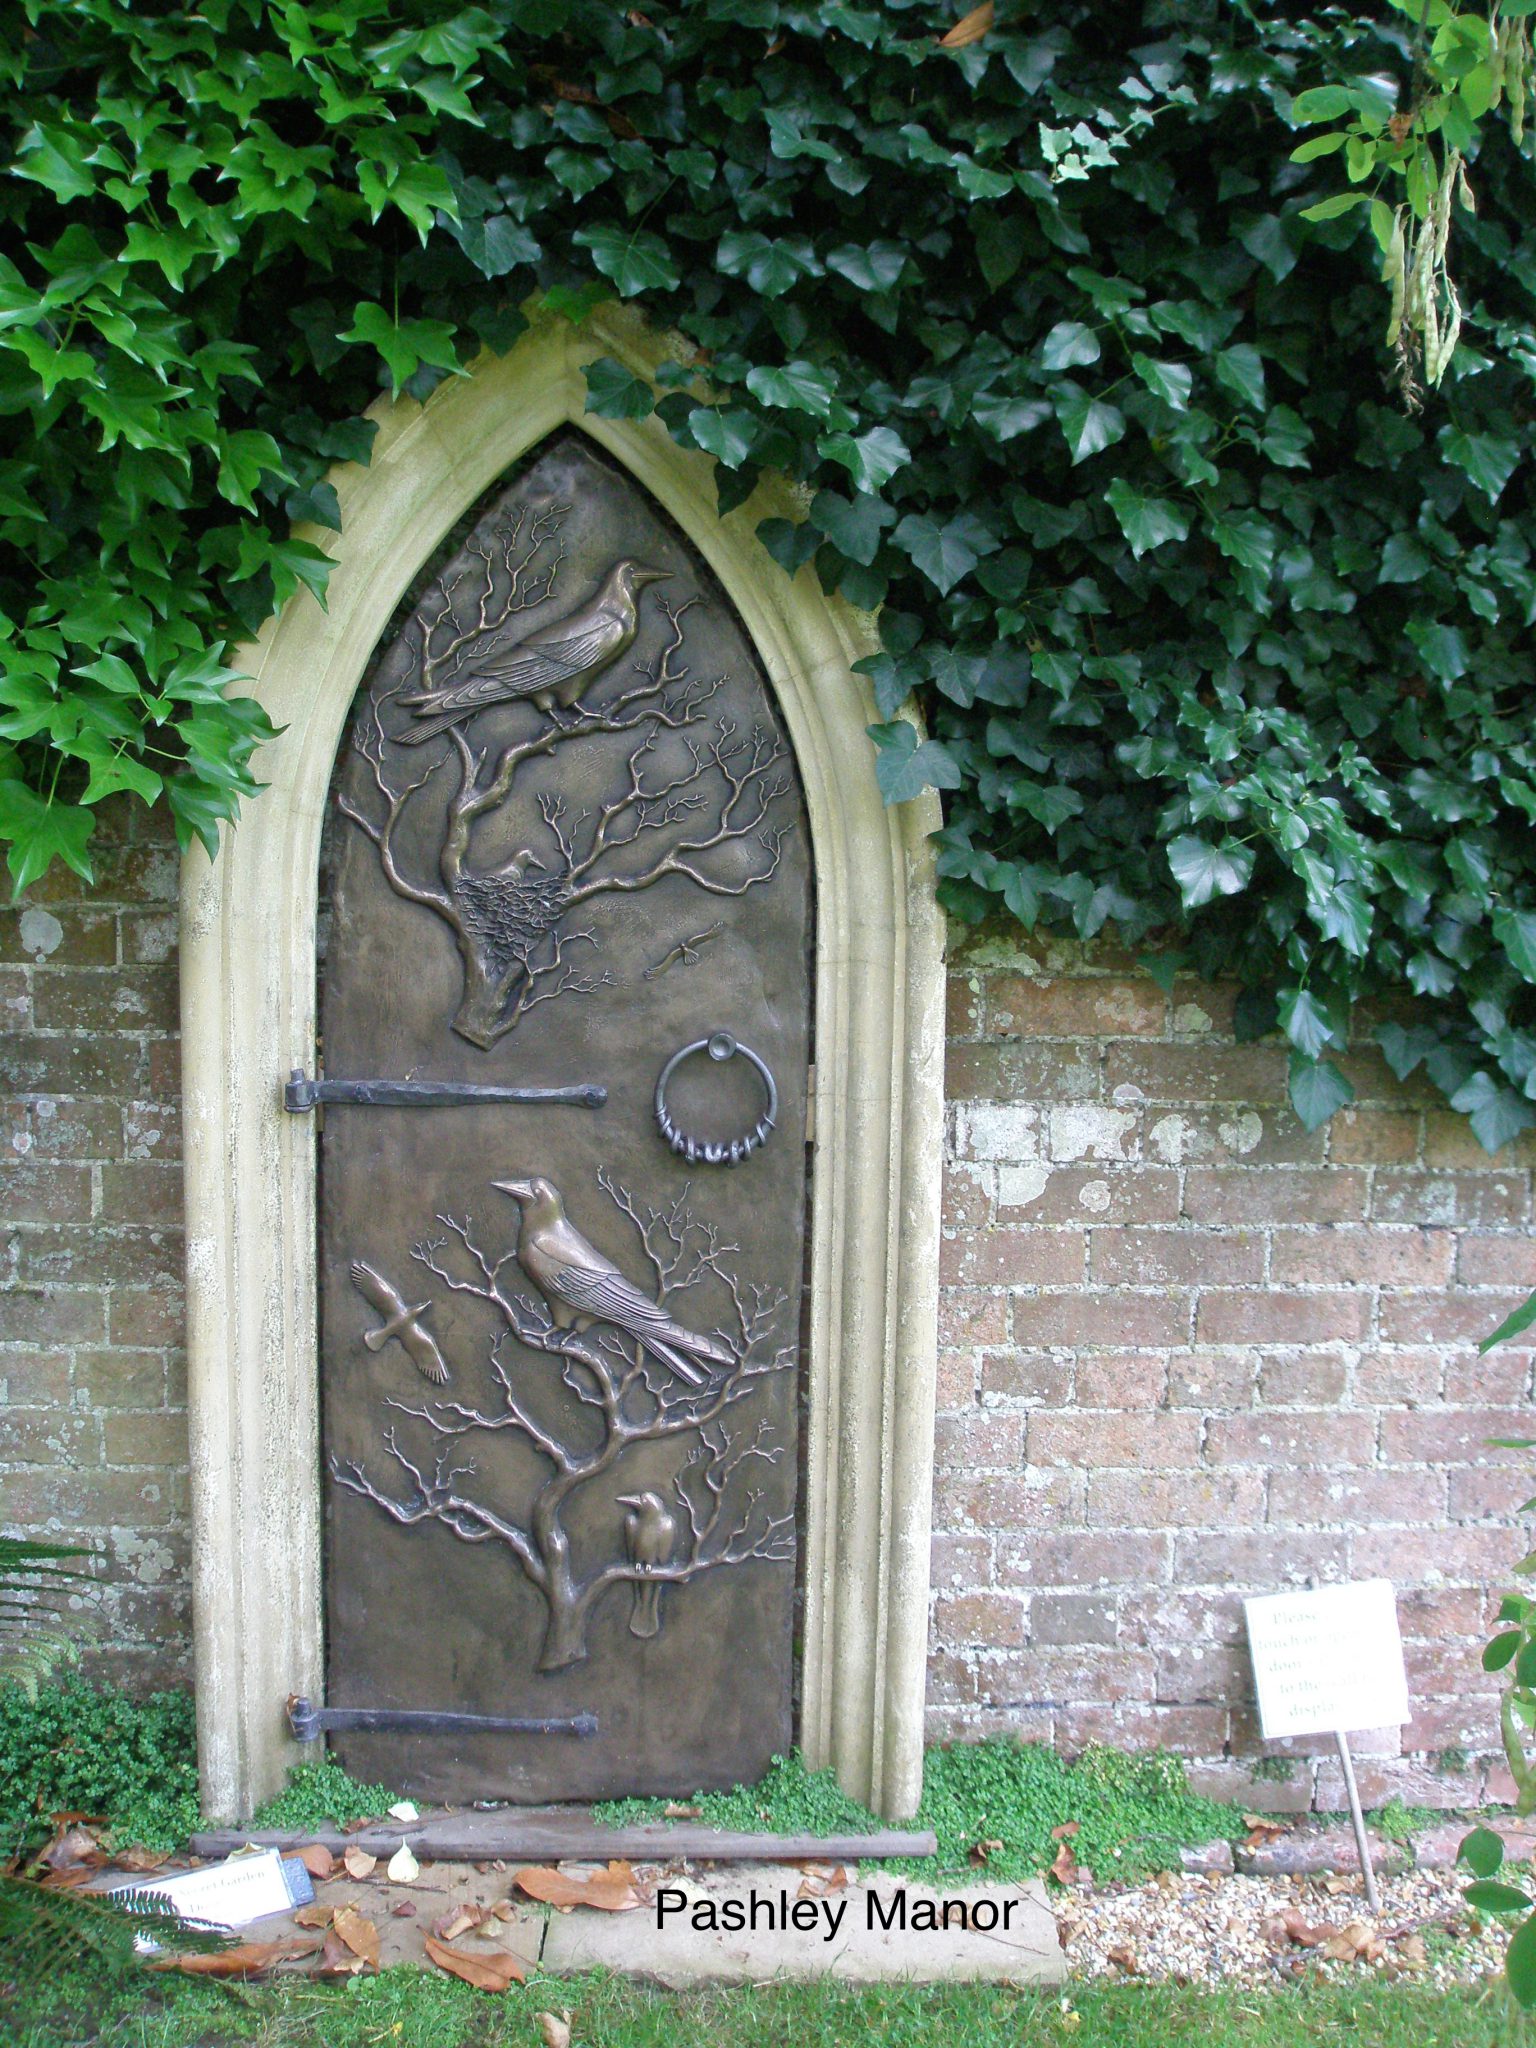 Here's Bronze Door to Nowhere, on a wall in the Rose Garden